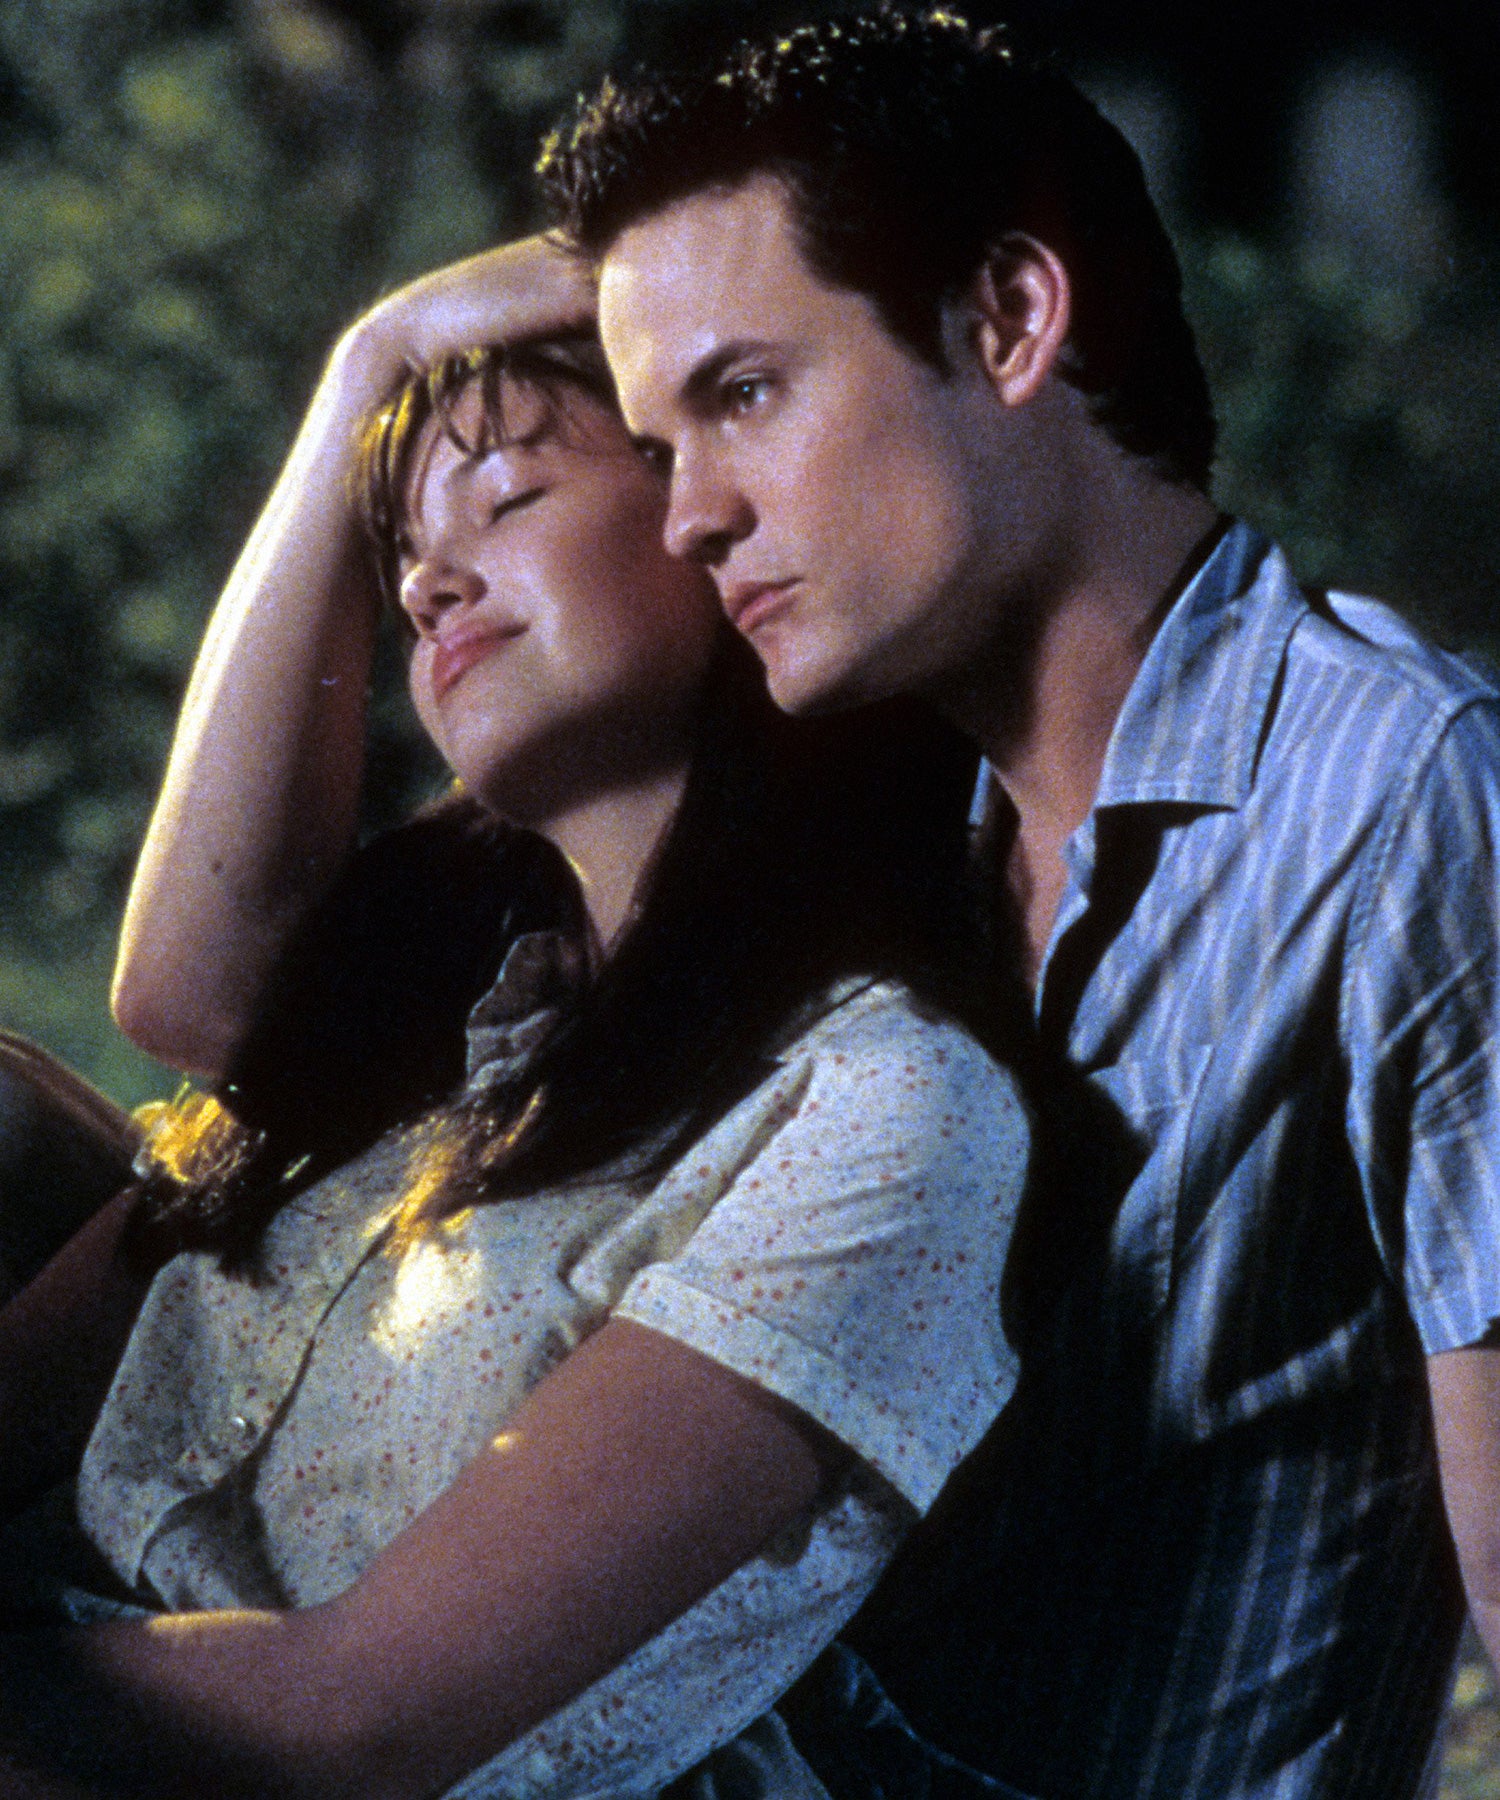 Sad Romantic Movies That Make You Cry, Love Stories